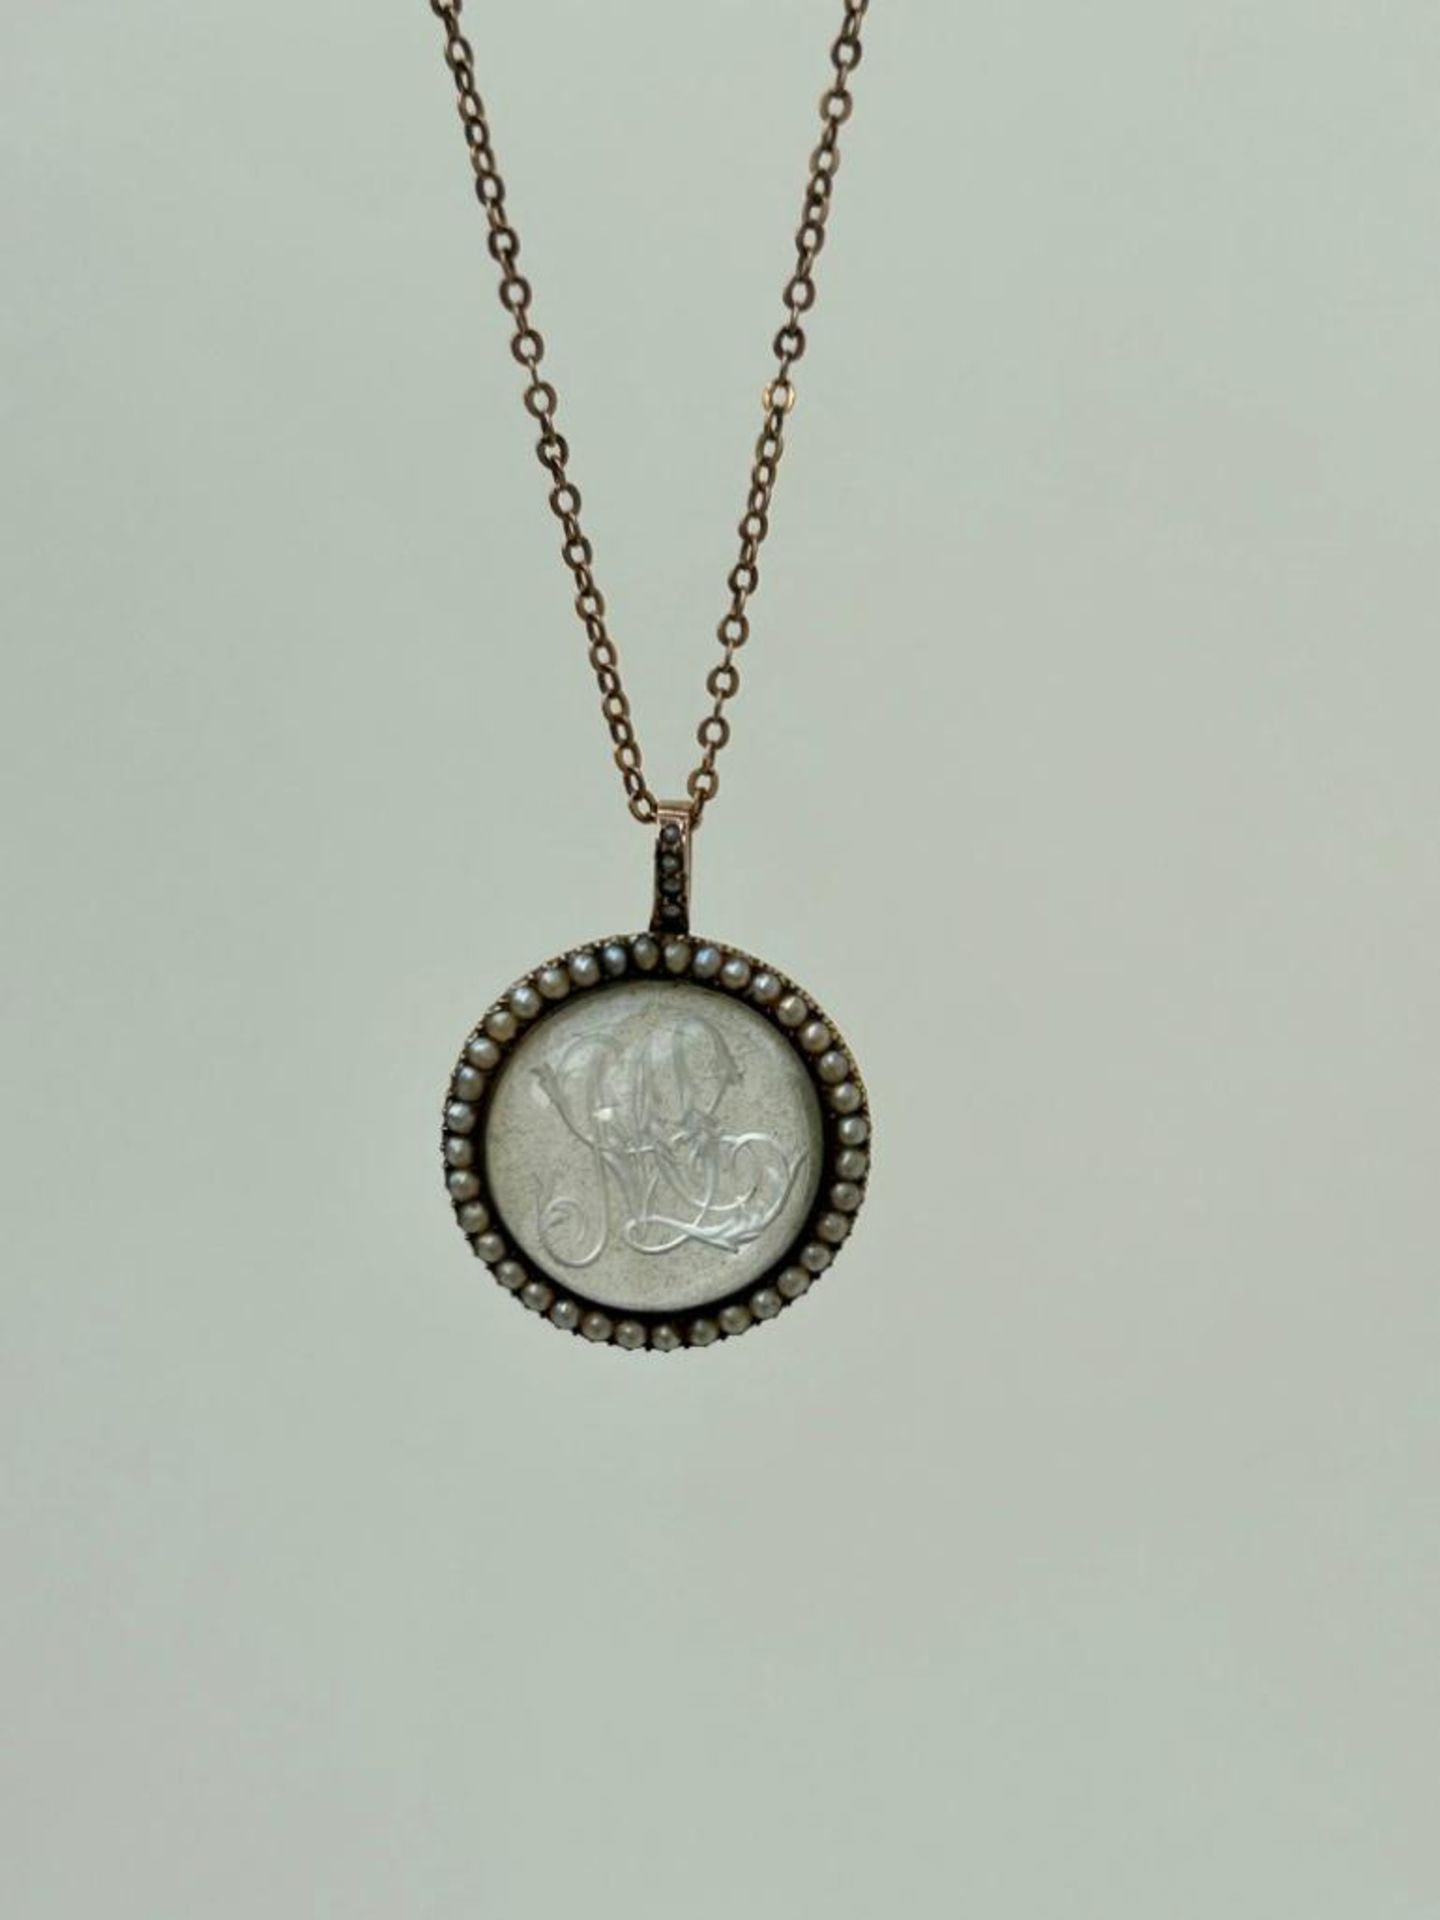 Antique Gold Domed Essex Crystal Monogram and Pearl Surrounded Pendant on Chain - Image 2 of 5